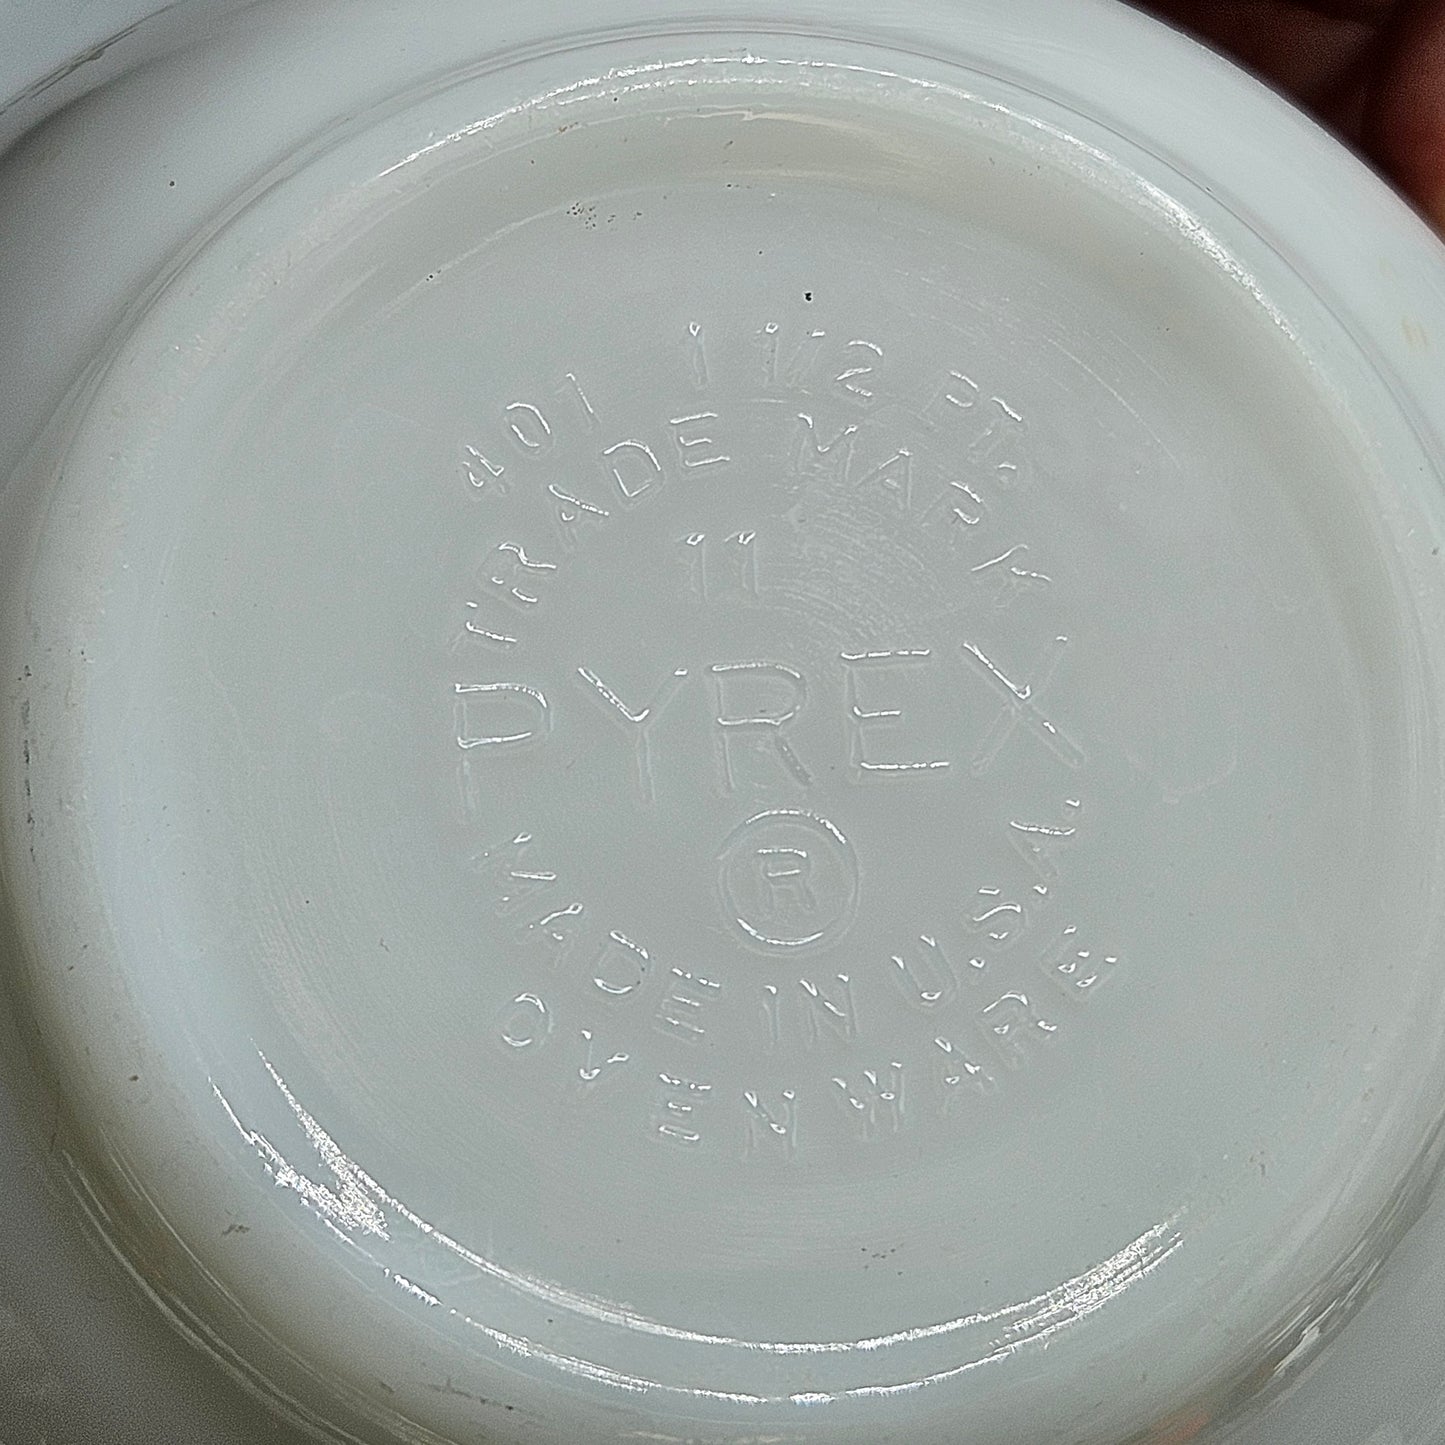 Vintage Pyrex Early American Mixing Bowl 1 1/2 PT